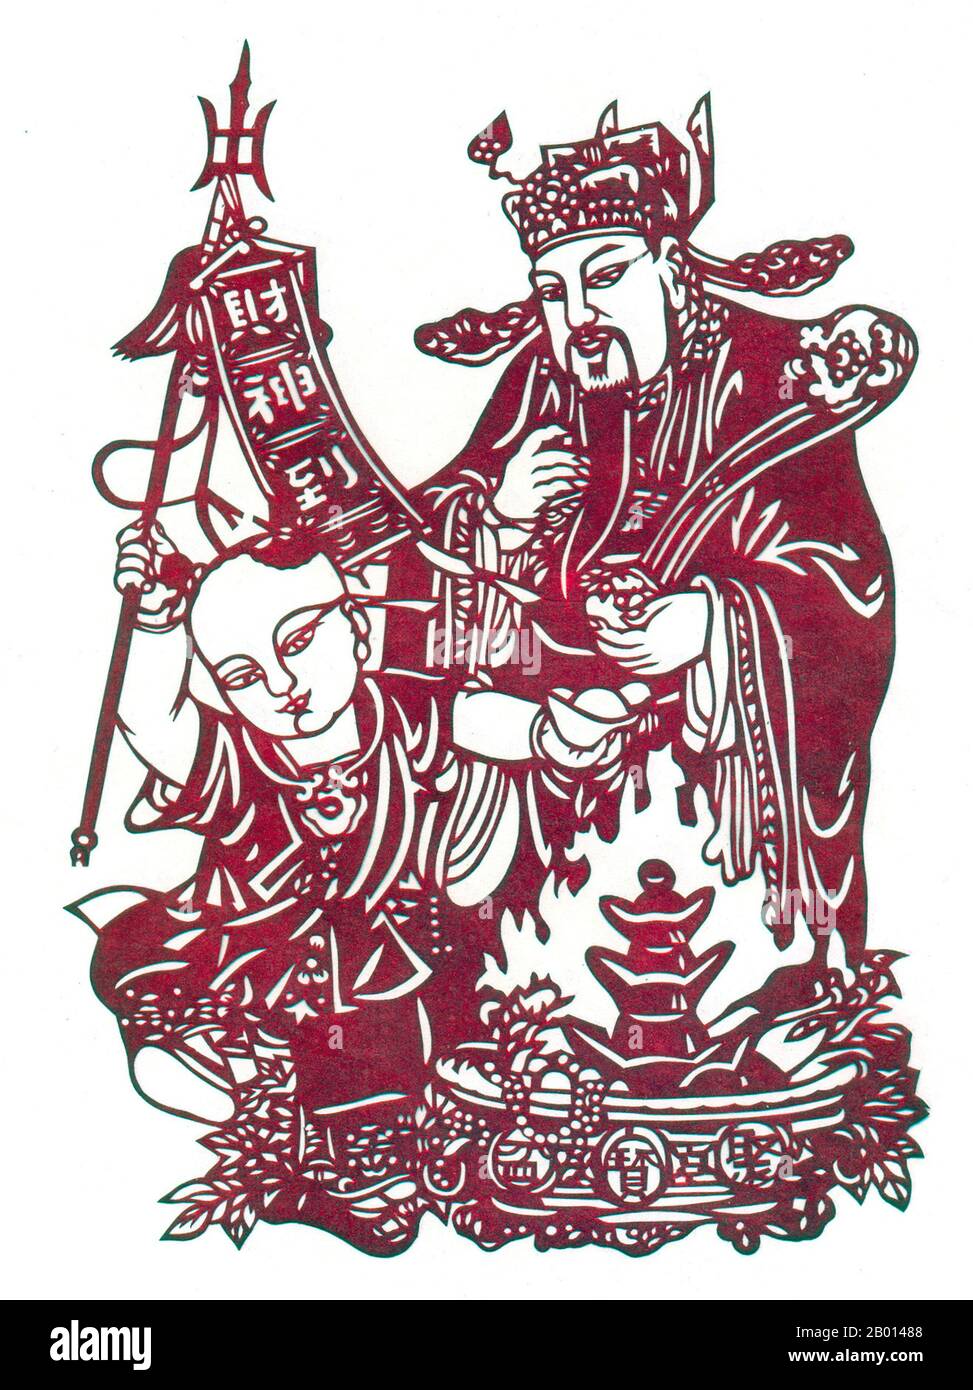 China: Cai Shen (Wade–Giles: Tsai Shen; Cantonese: Choy Sun, Hakka: Choy Sin) is the Chinese God of Wealth or Prosperity. Paper cutting, 20th century.  Cai Shen can also be referred to as Zhao Gongming (Chao Kung-ming) or Bi Gan (Pi-kan). Though Cai Shen began as a Chinese folk hero, later deified and venerated by local followers and admirers, Taoism and Pure Land Buddhism also came to venerate him as a god. Cai Shen's name is often invoked during the Chinese New Year celebrations. He is often depicted riding a black tiger and holding a golden rod. Stock Photo